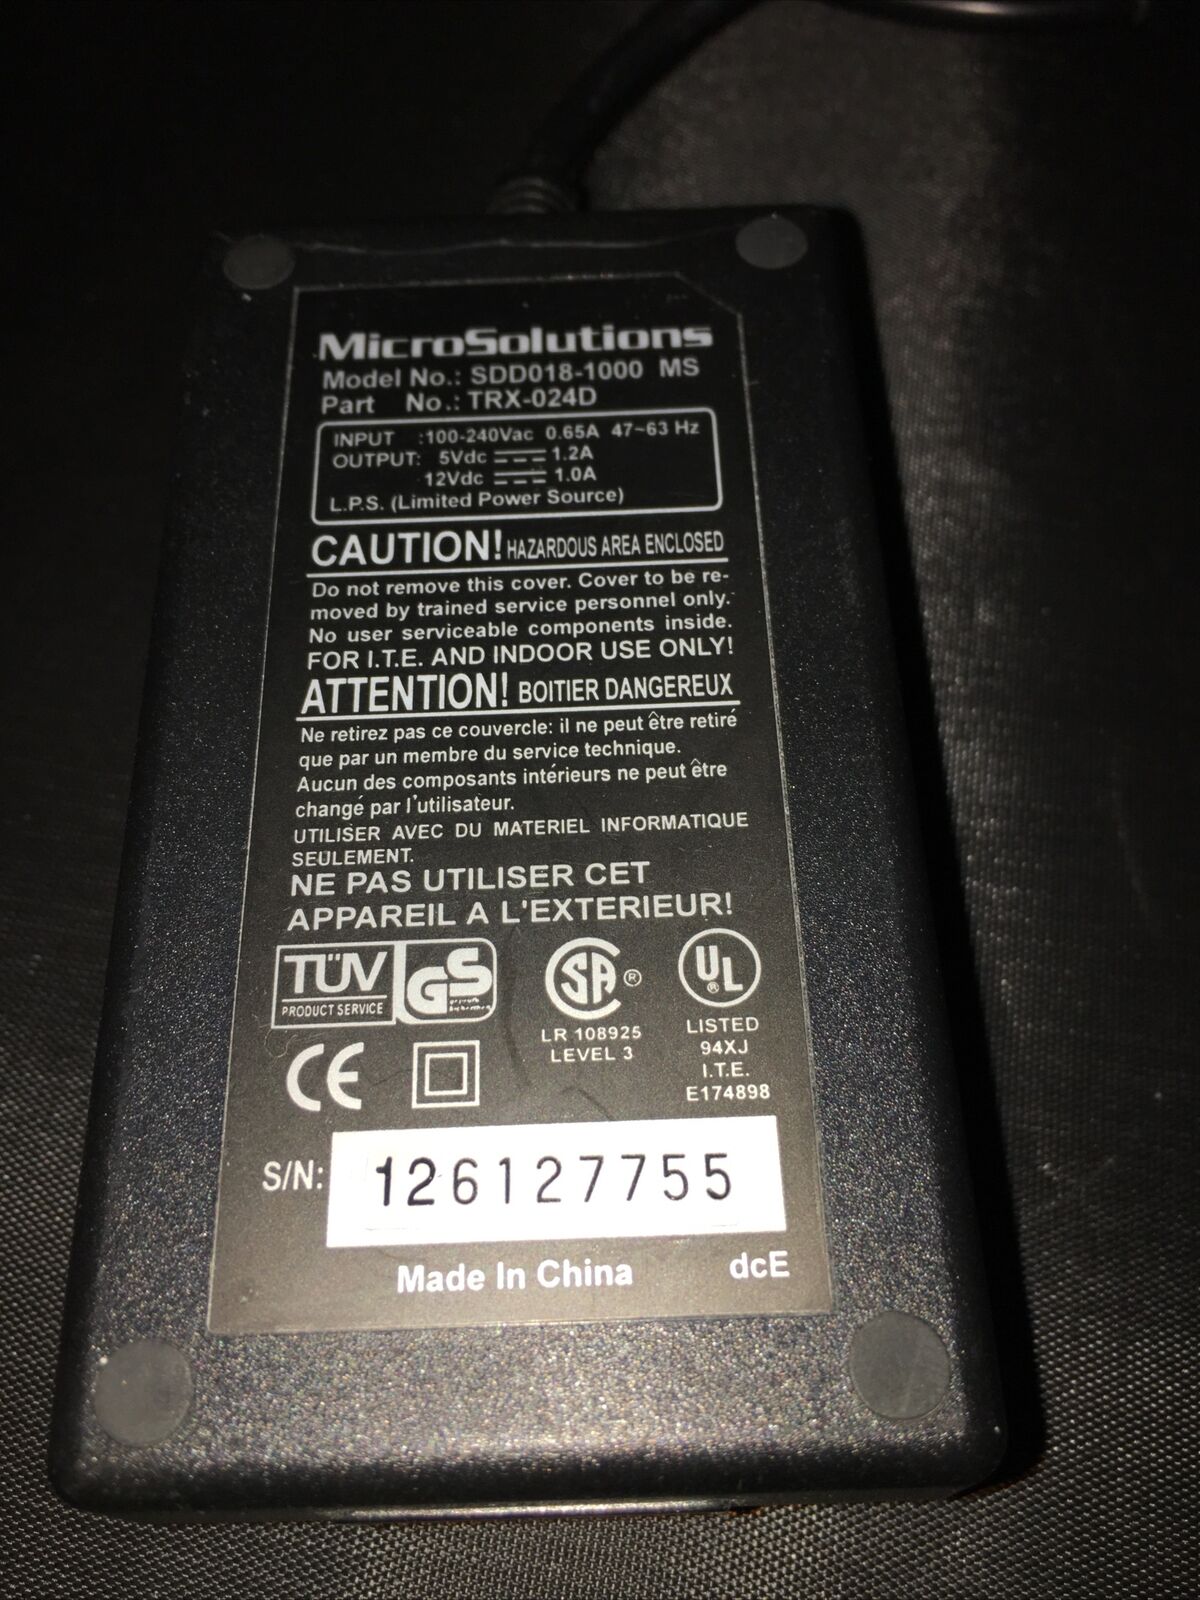 AC Adapter POWER SUPPLY MICRO SOLUTIONS TRX-024D SDD18-1000 MS 5V 1.2A 12V 1A MPN: sdd018-1000 Compatible Model: 1